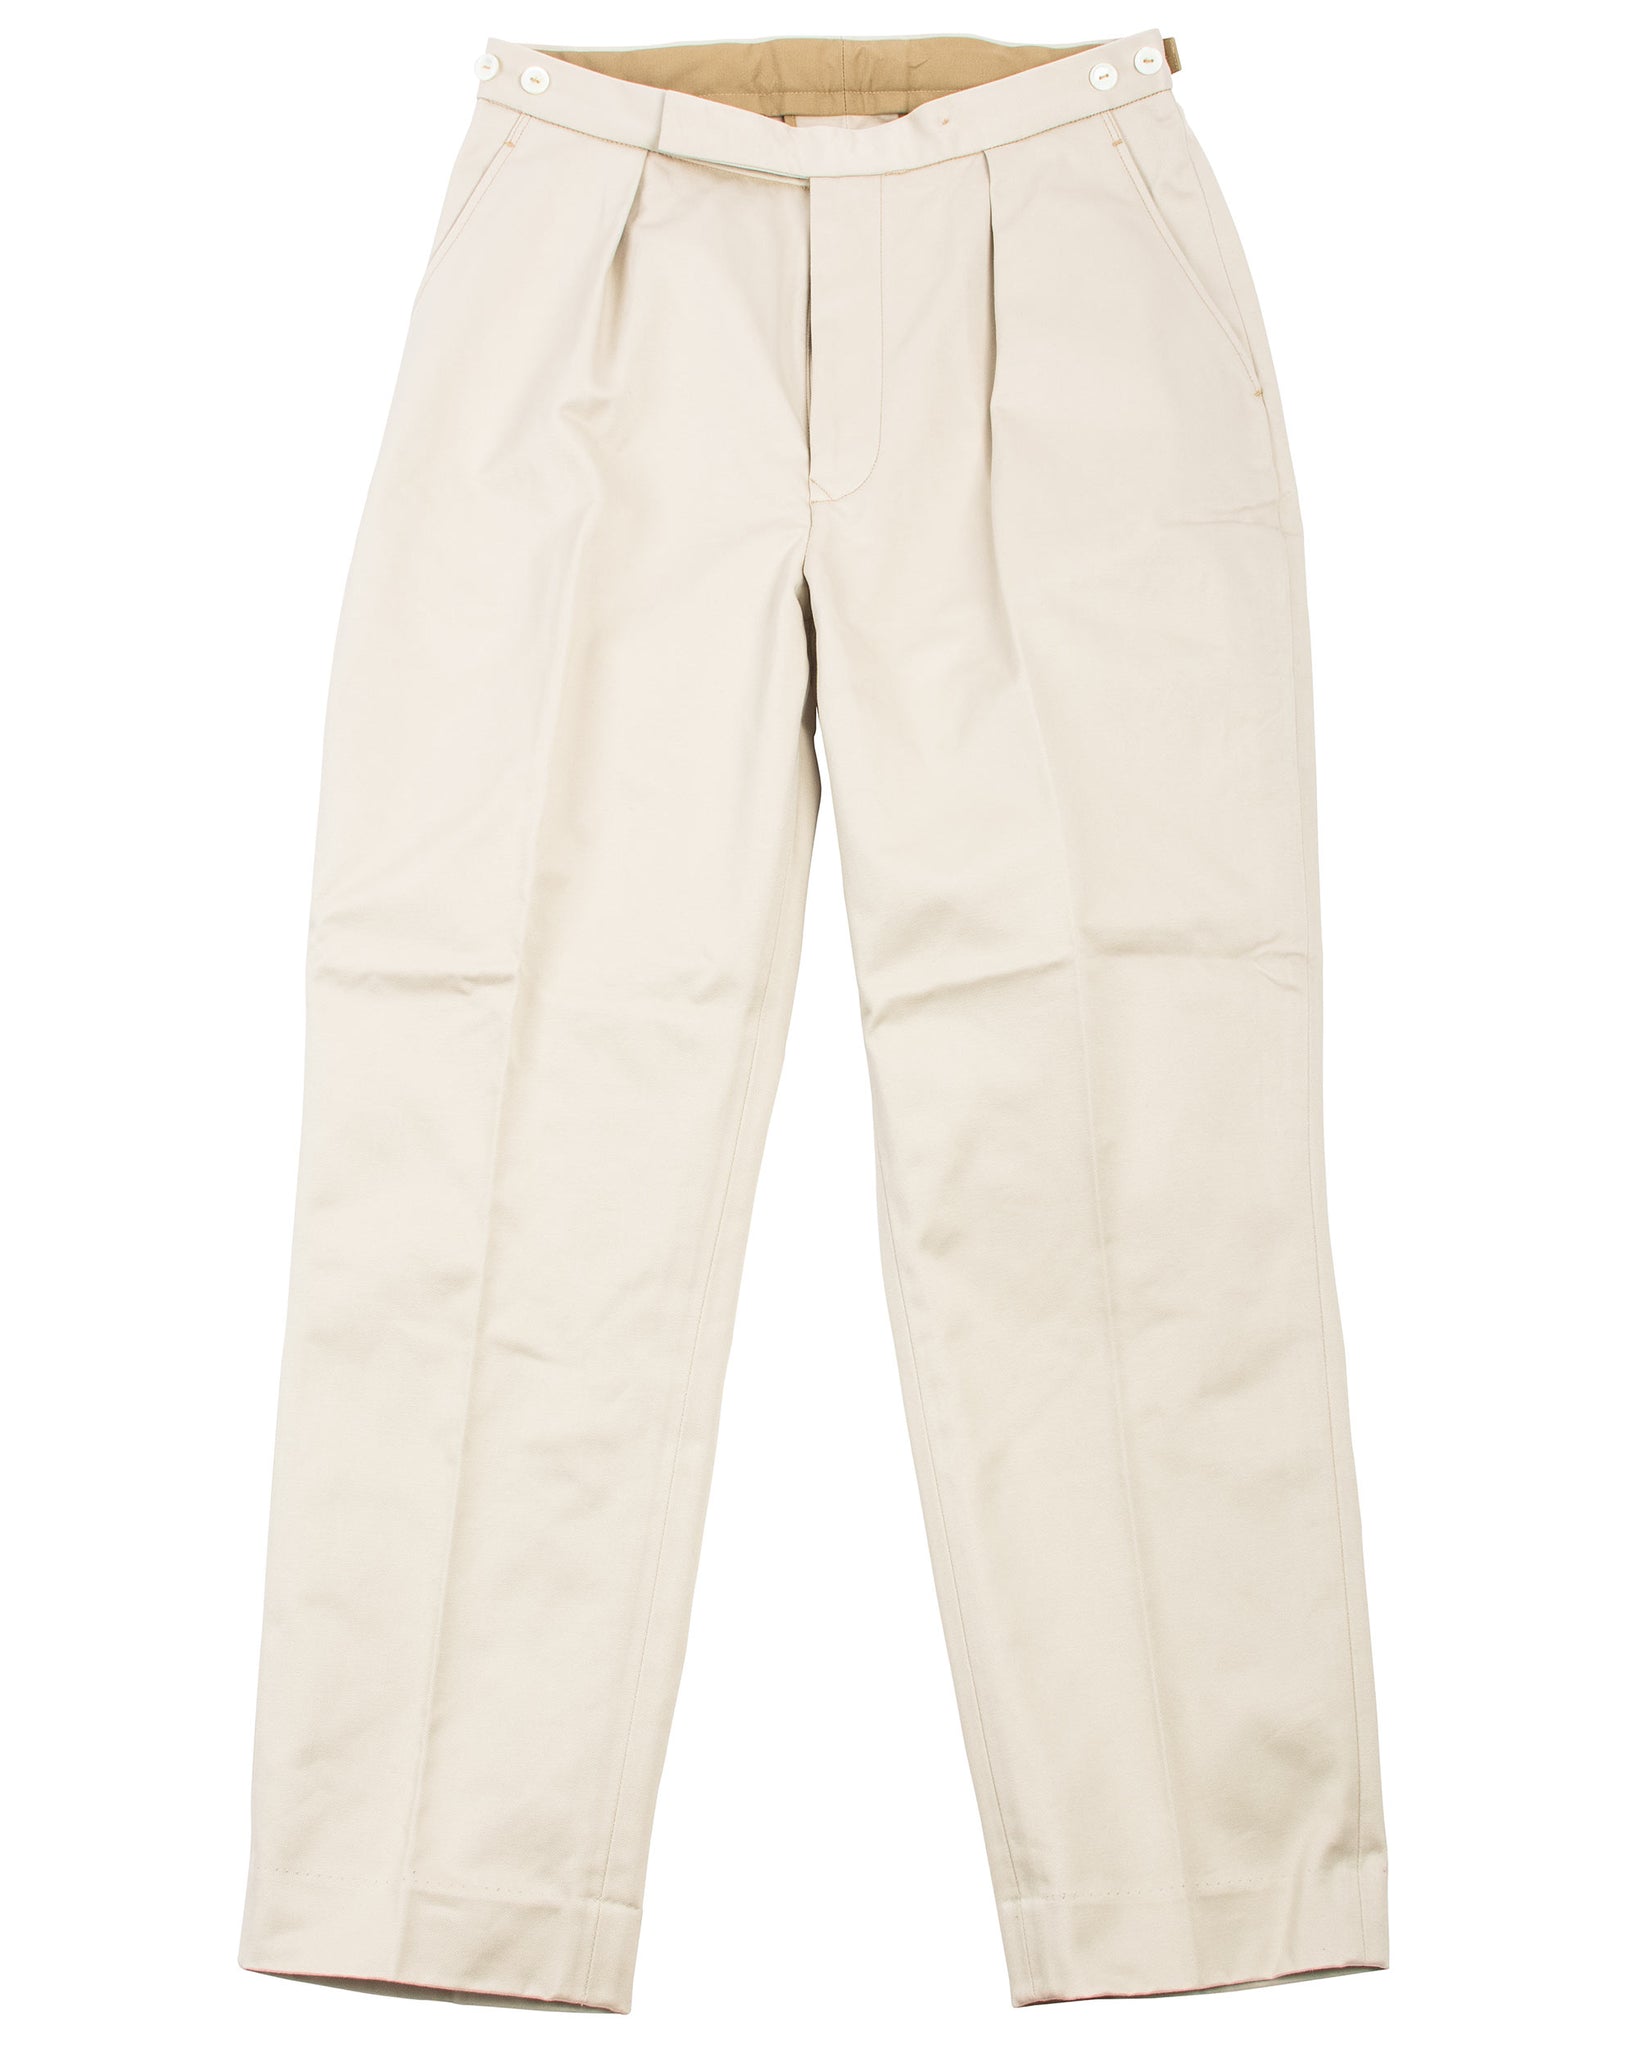 The Real McCoy's MP22018 1950s Cotton Chino Trousers / Beige